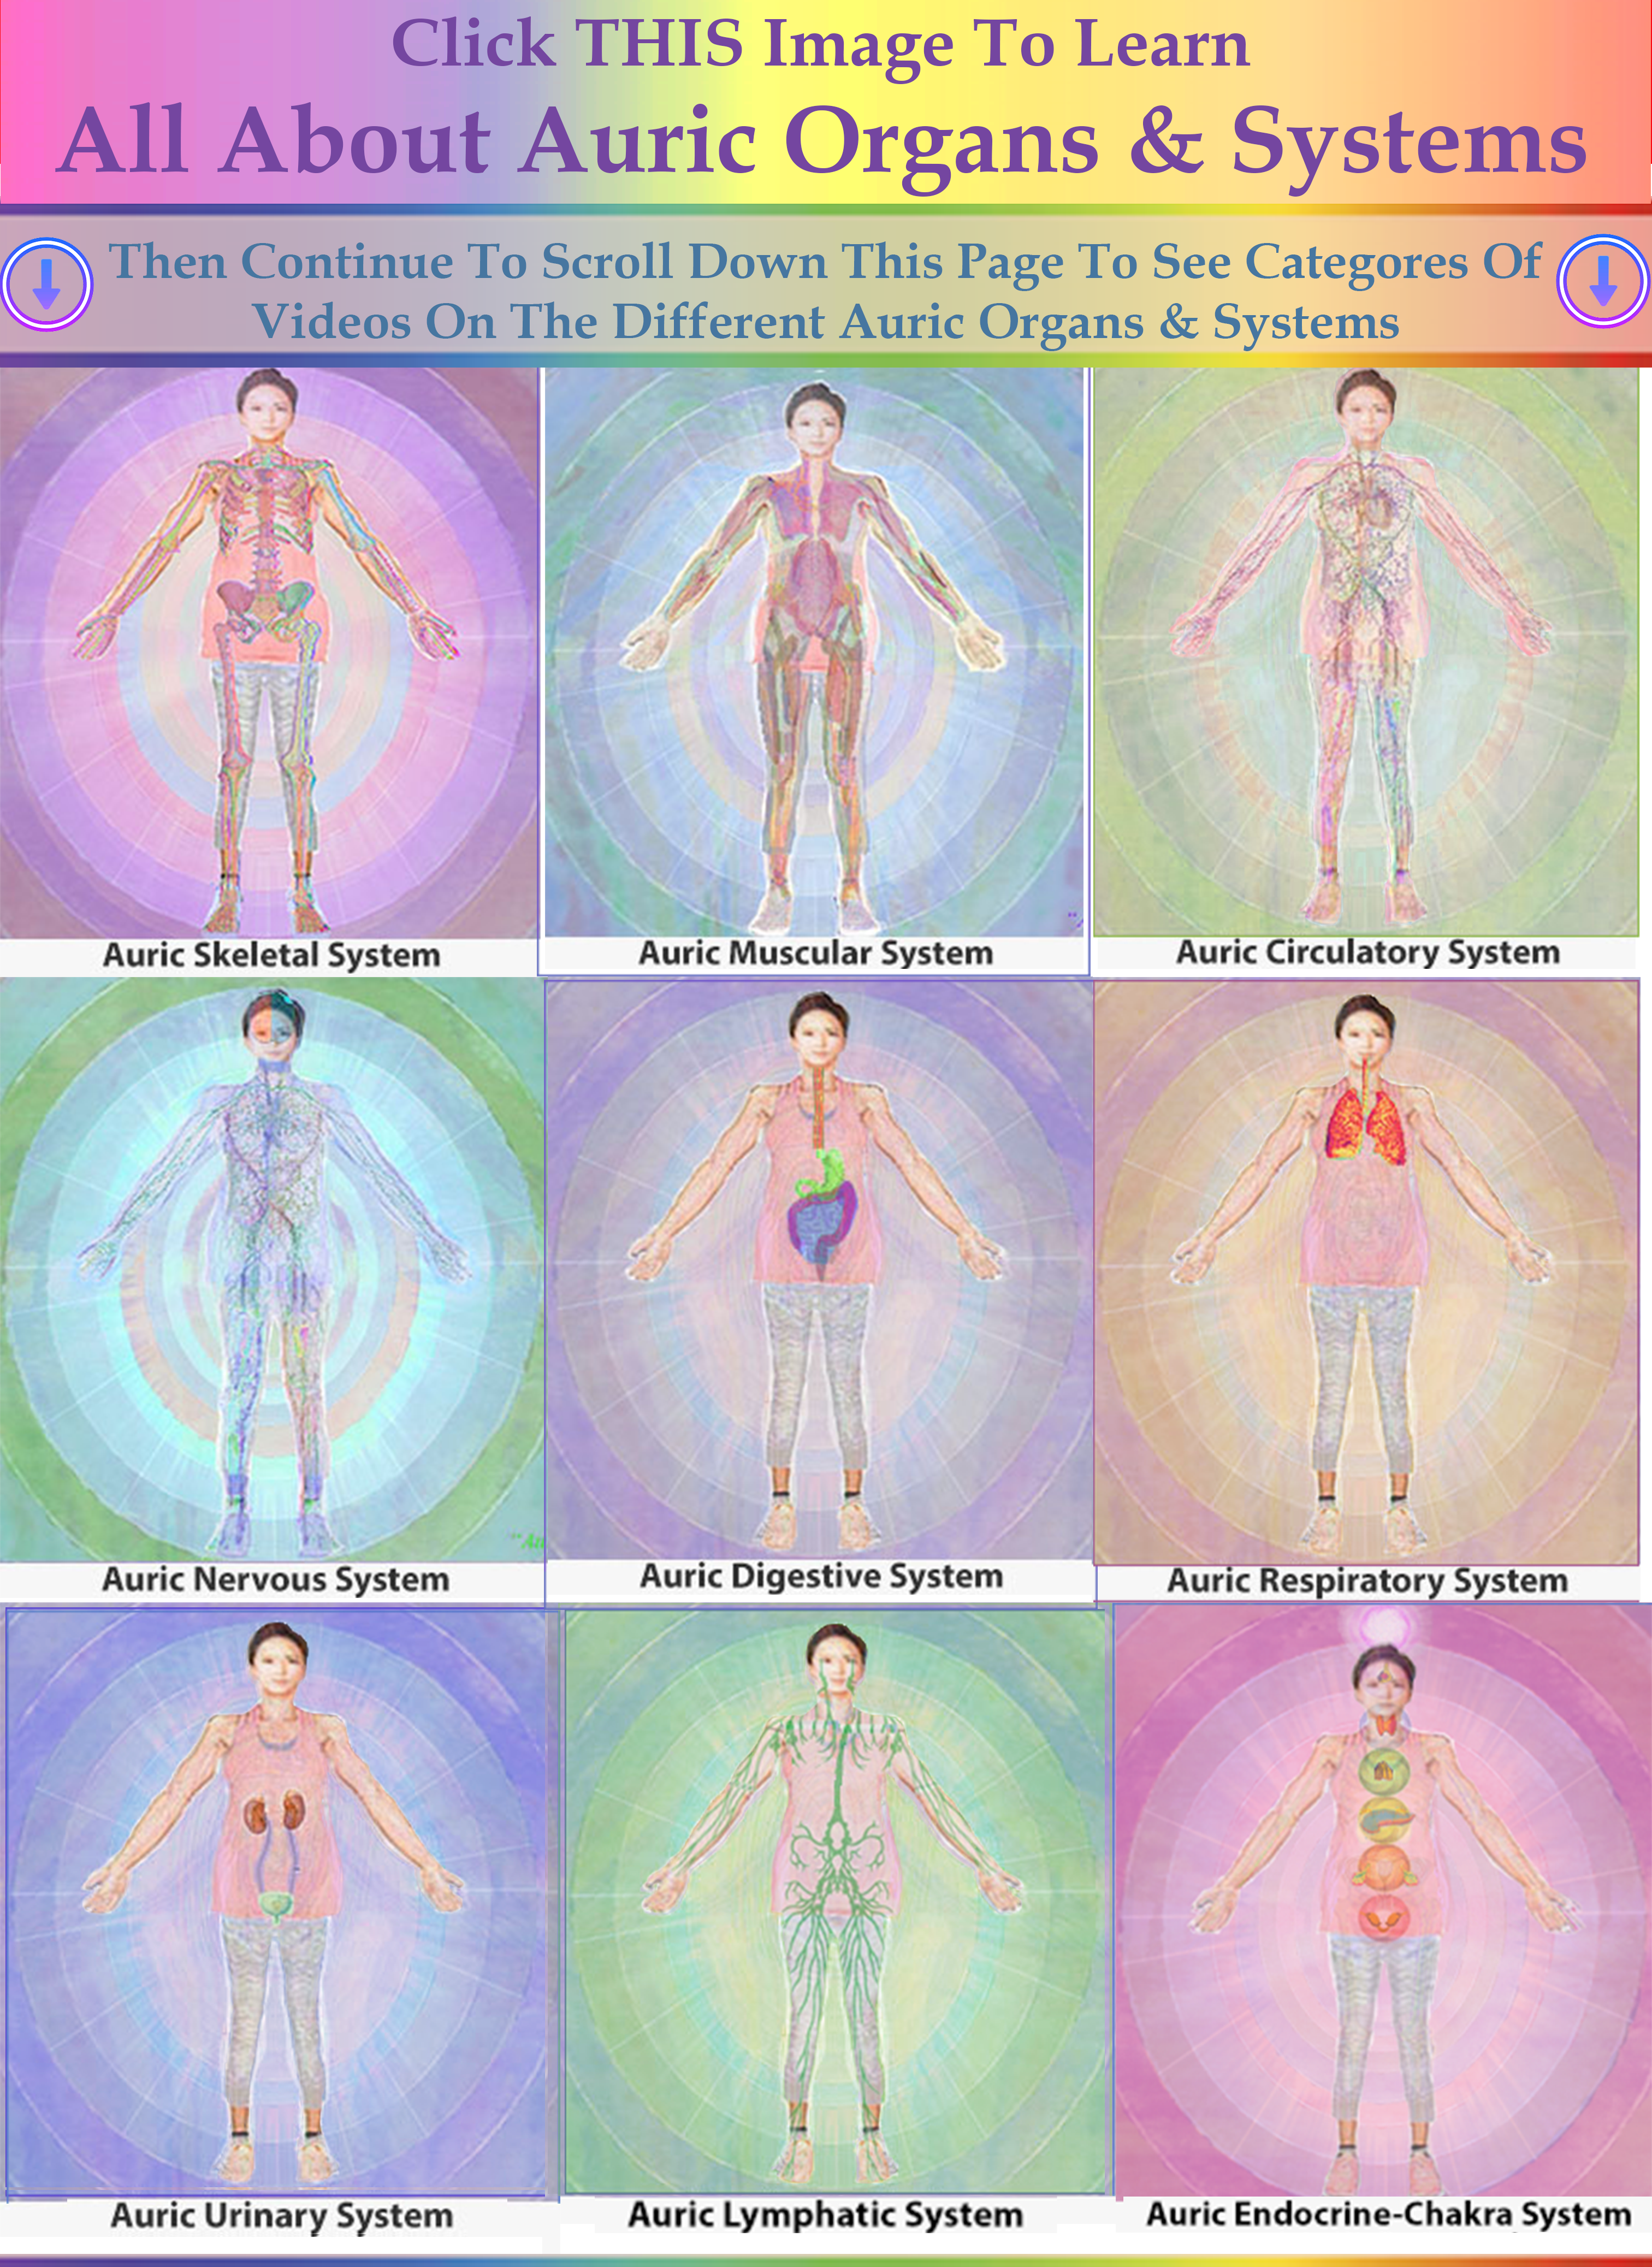 Auric Organs and Systems Combined Image 